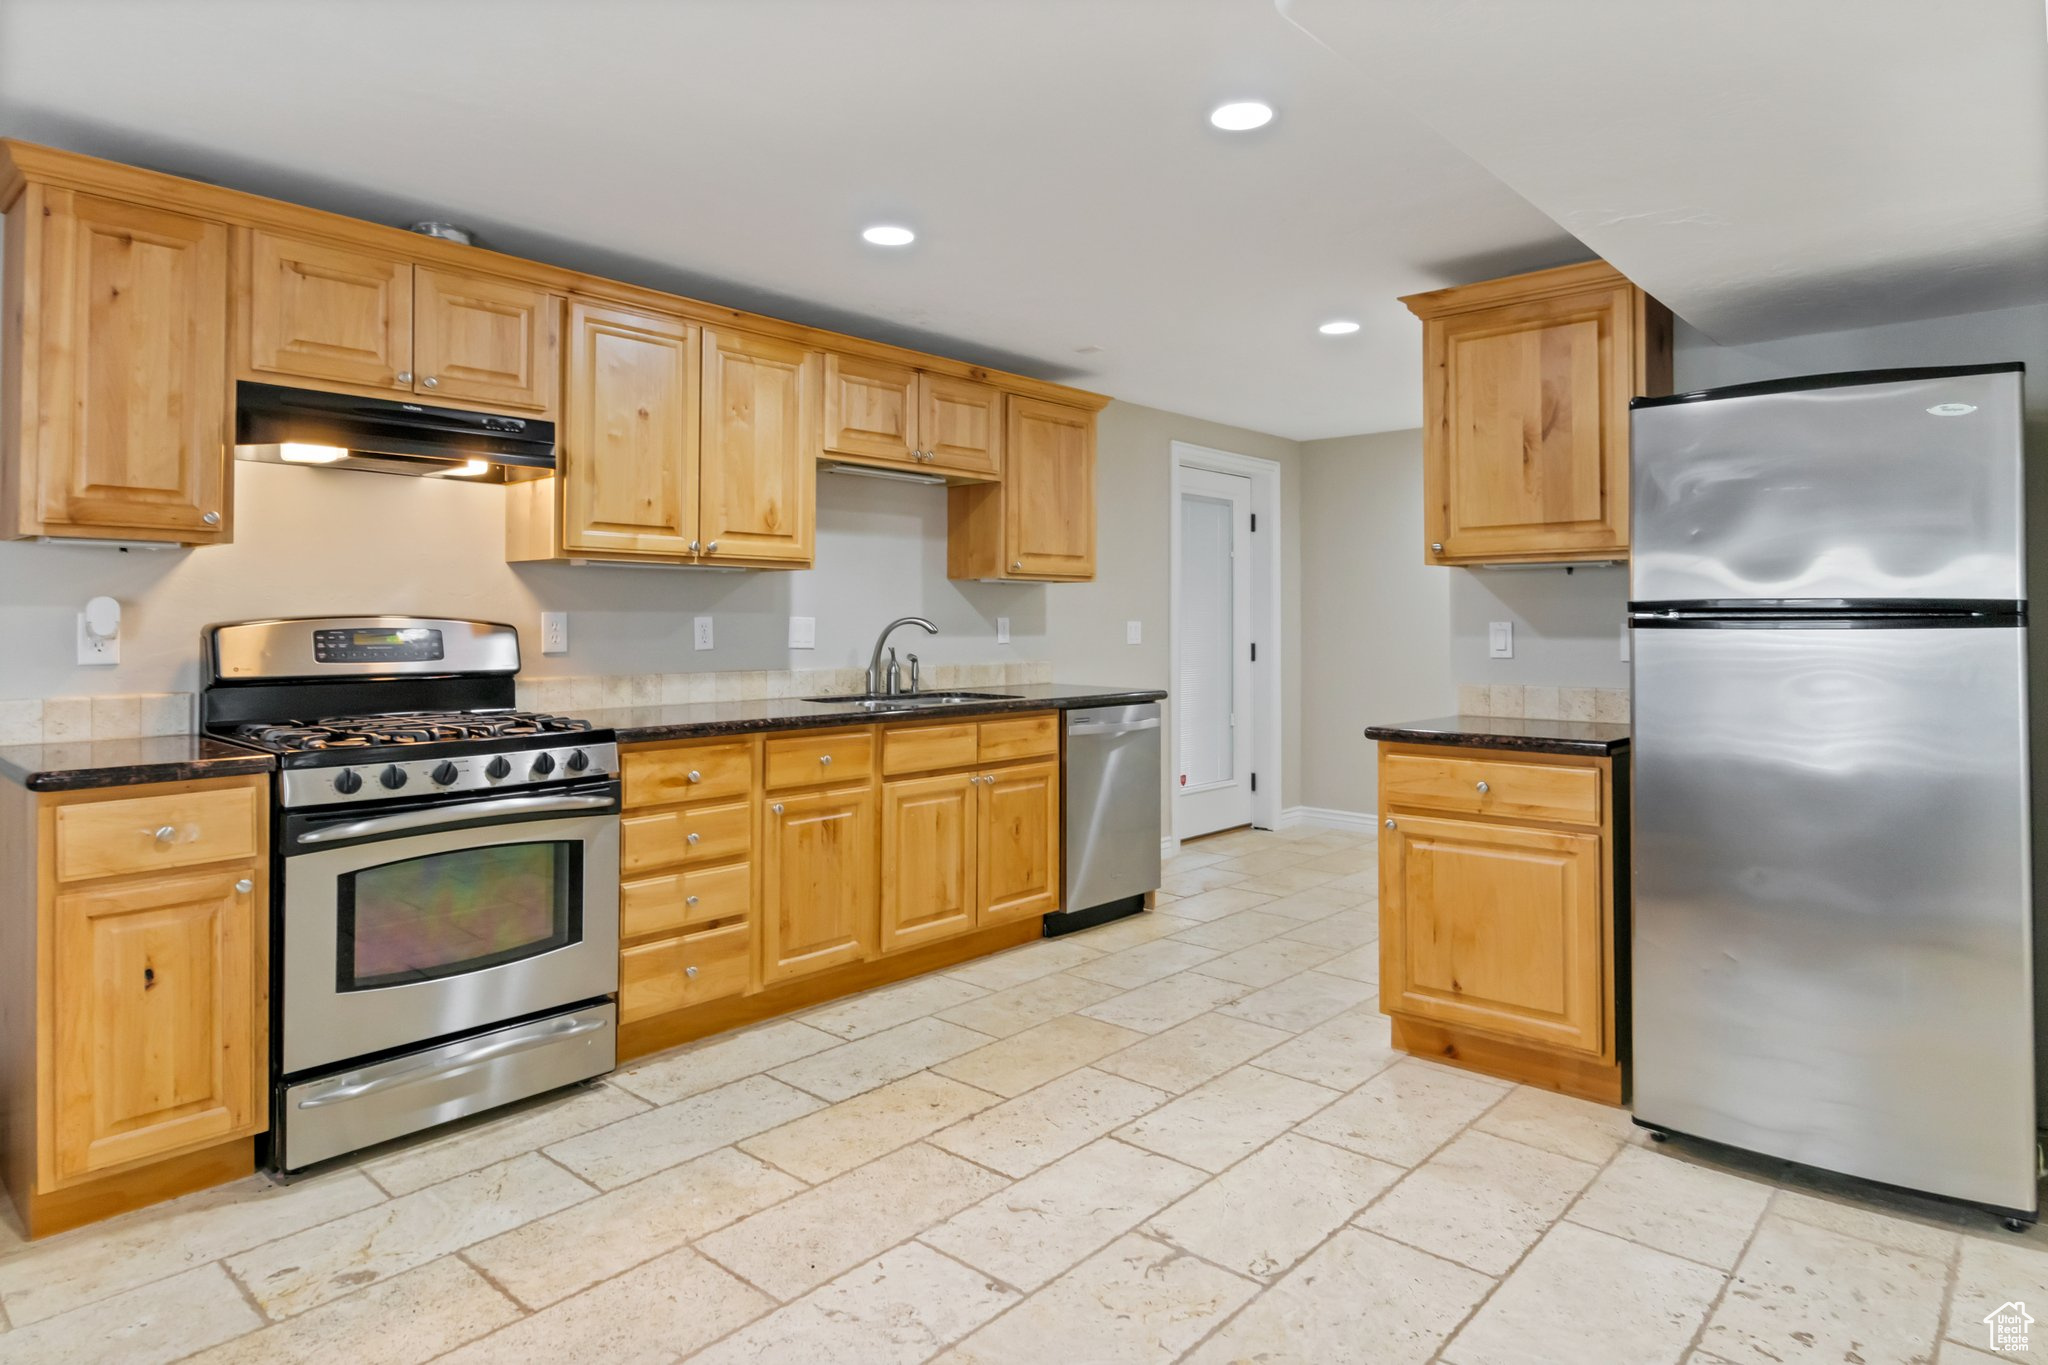 Kitchen with appliances with stainless steel finishes, sink, dark stone counters, and light tile floors